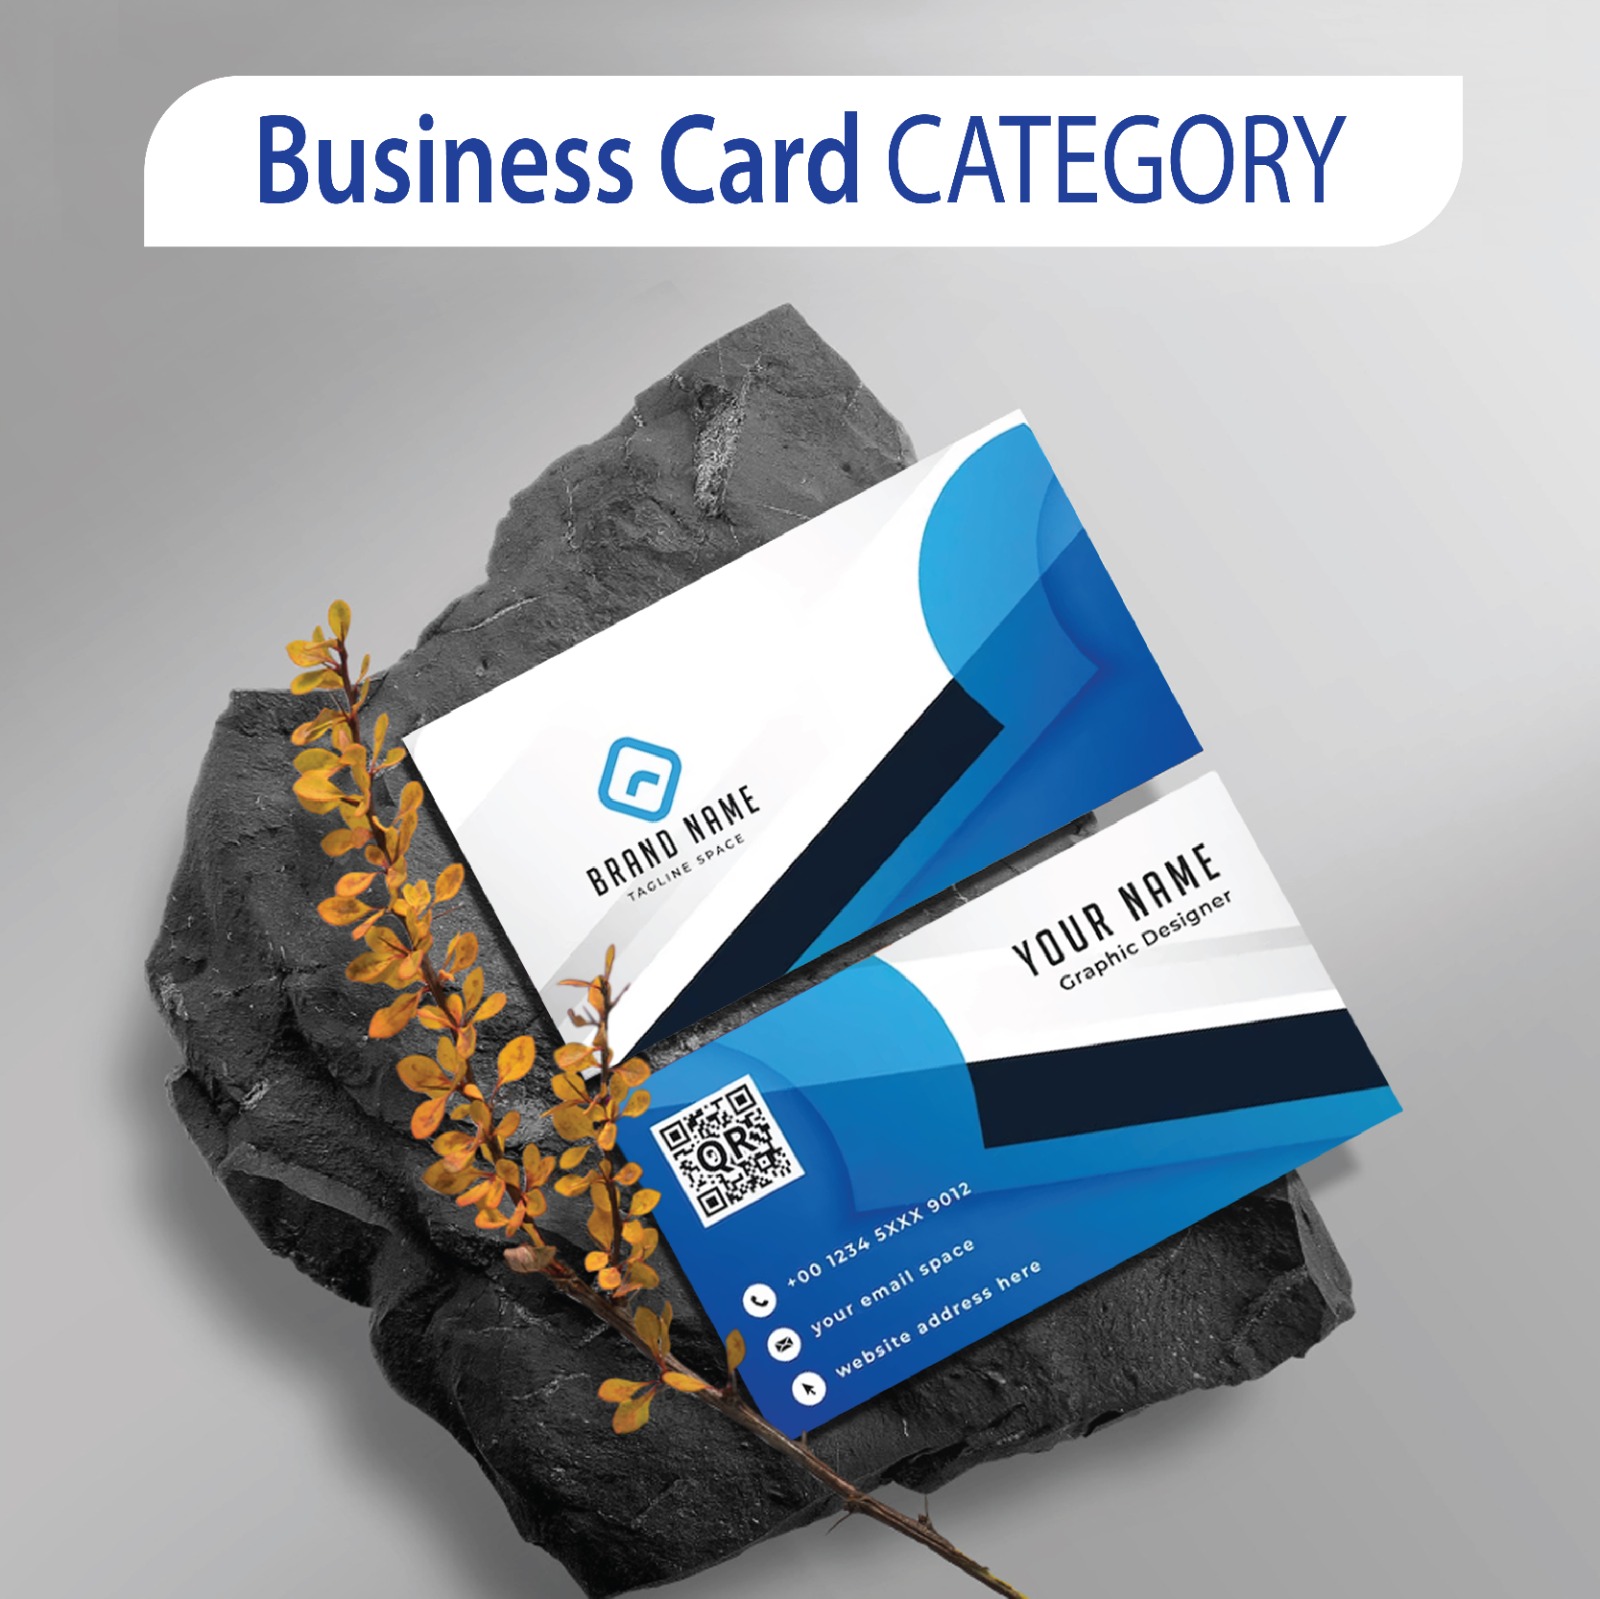 Business Card Category